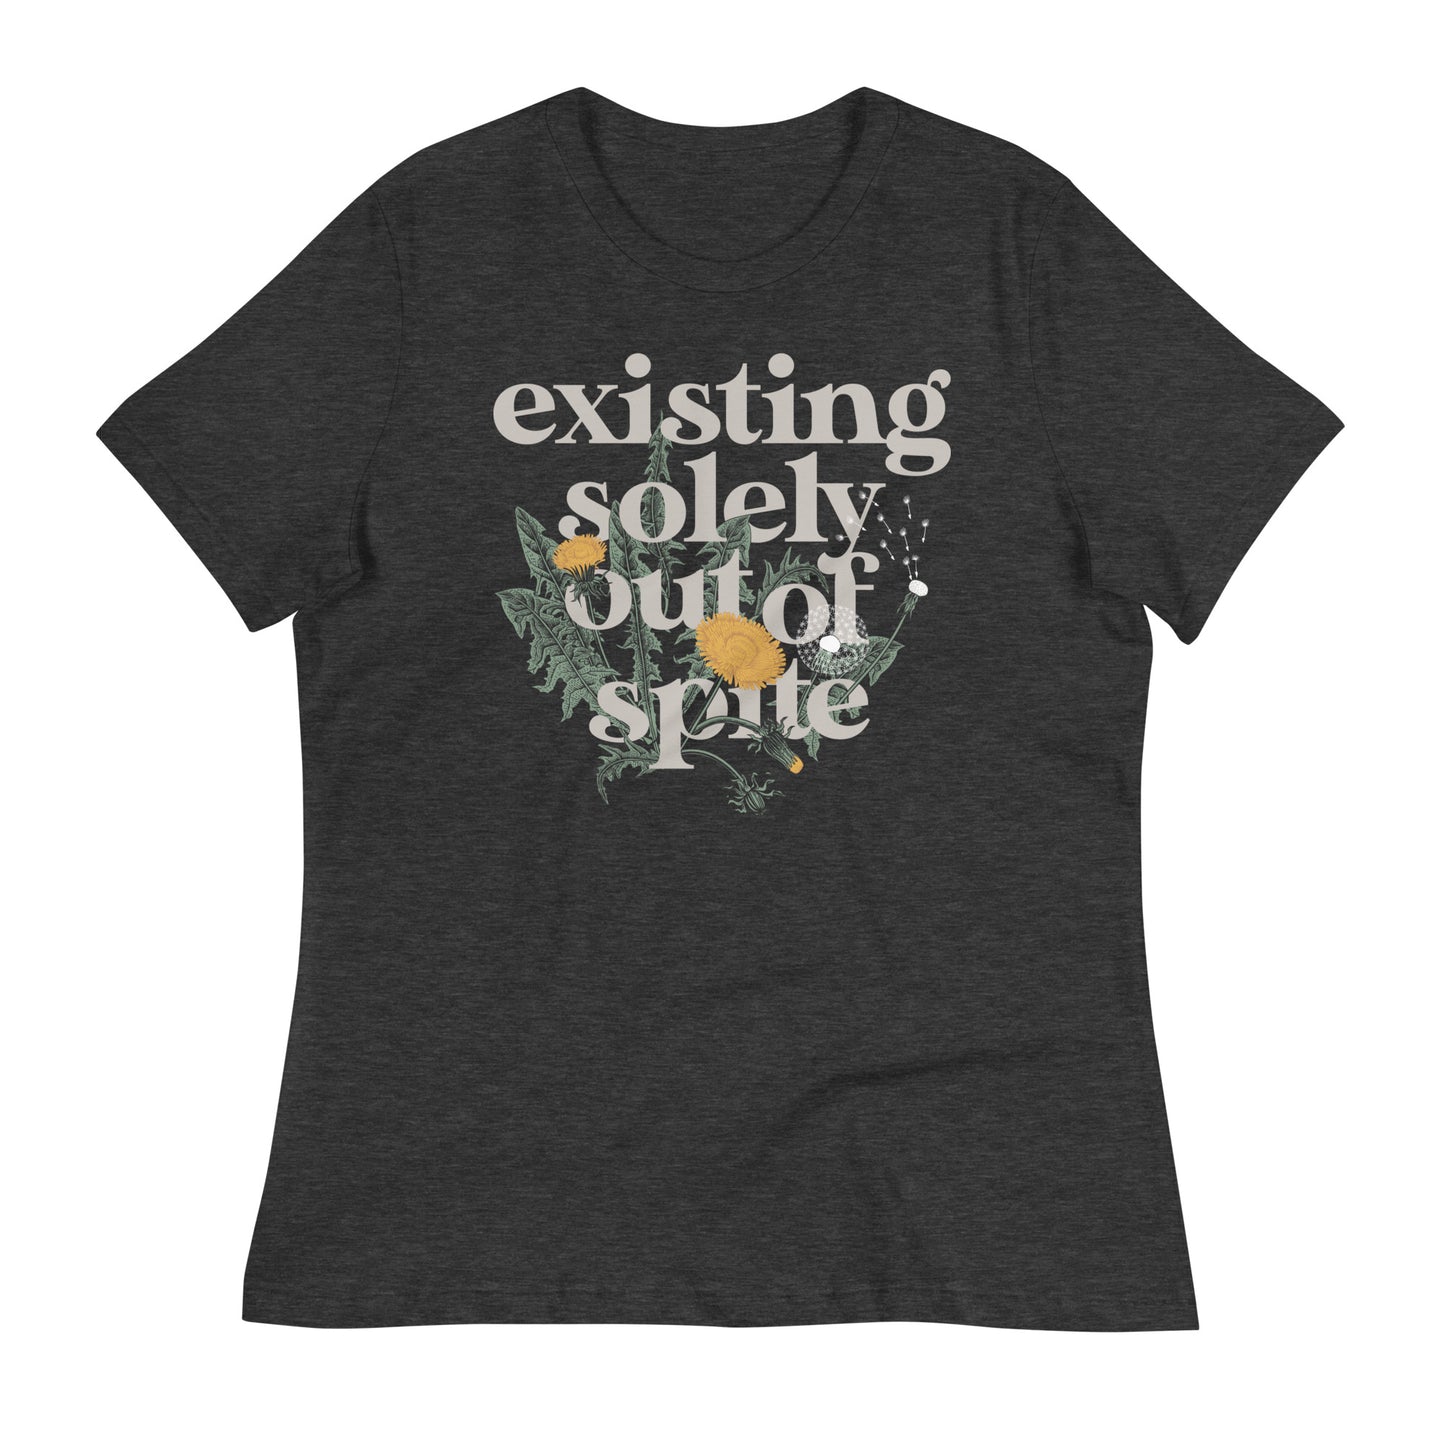 Existing Solely Out Of Spite Women's Signature Tee